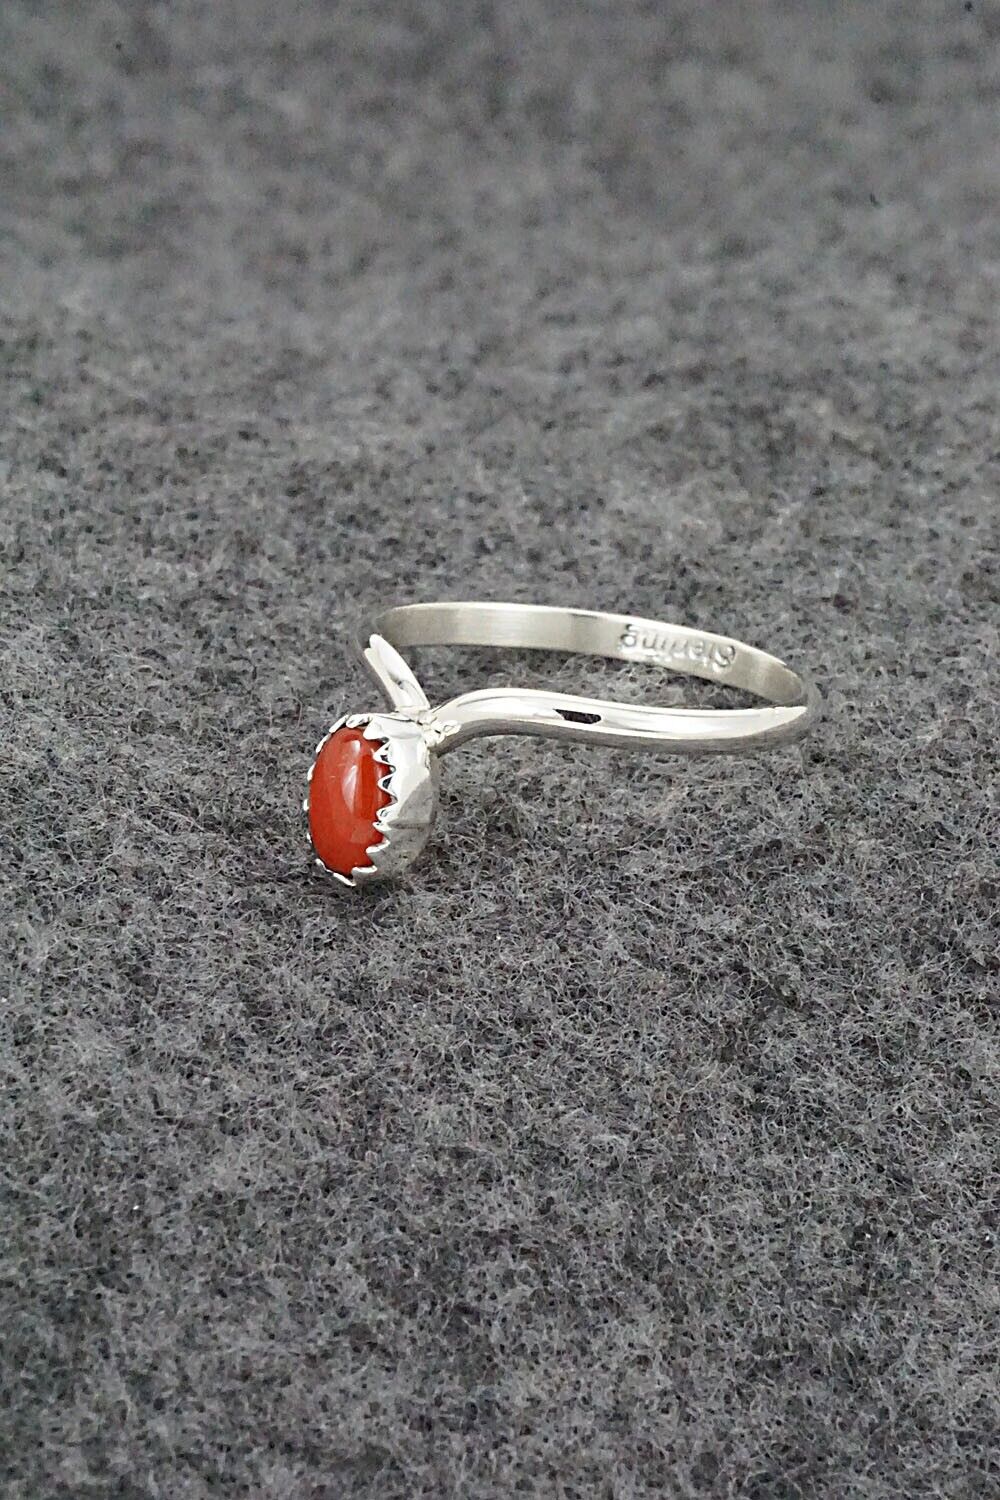 Coral & Sterling Silver Ring - Hiram Largo - Size 8.5